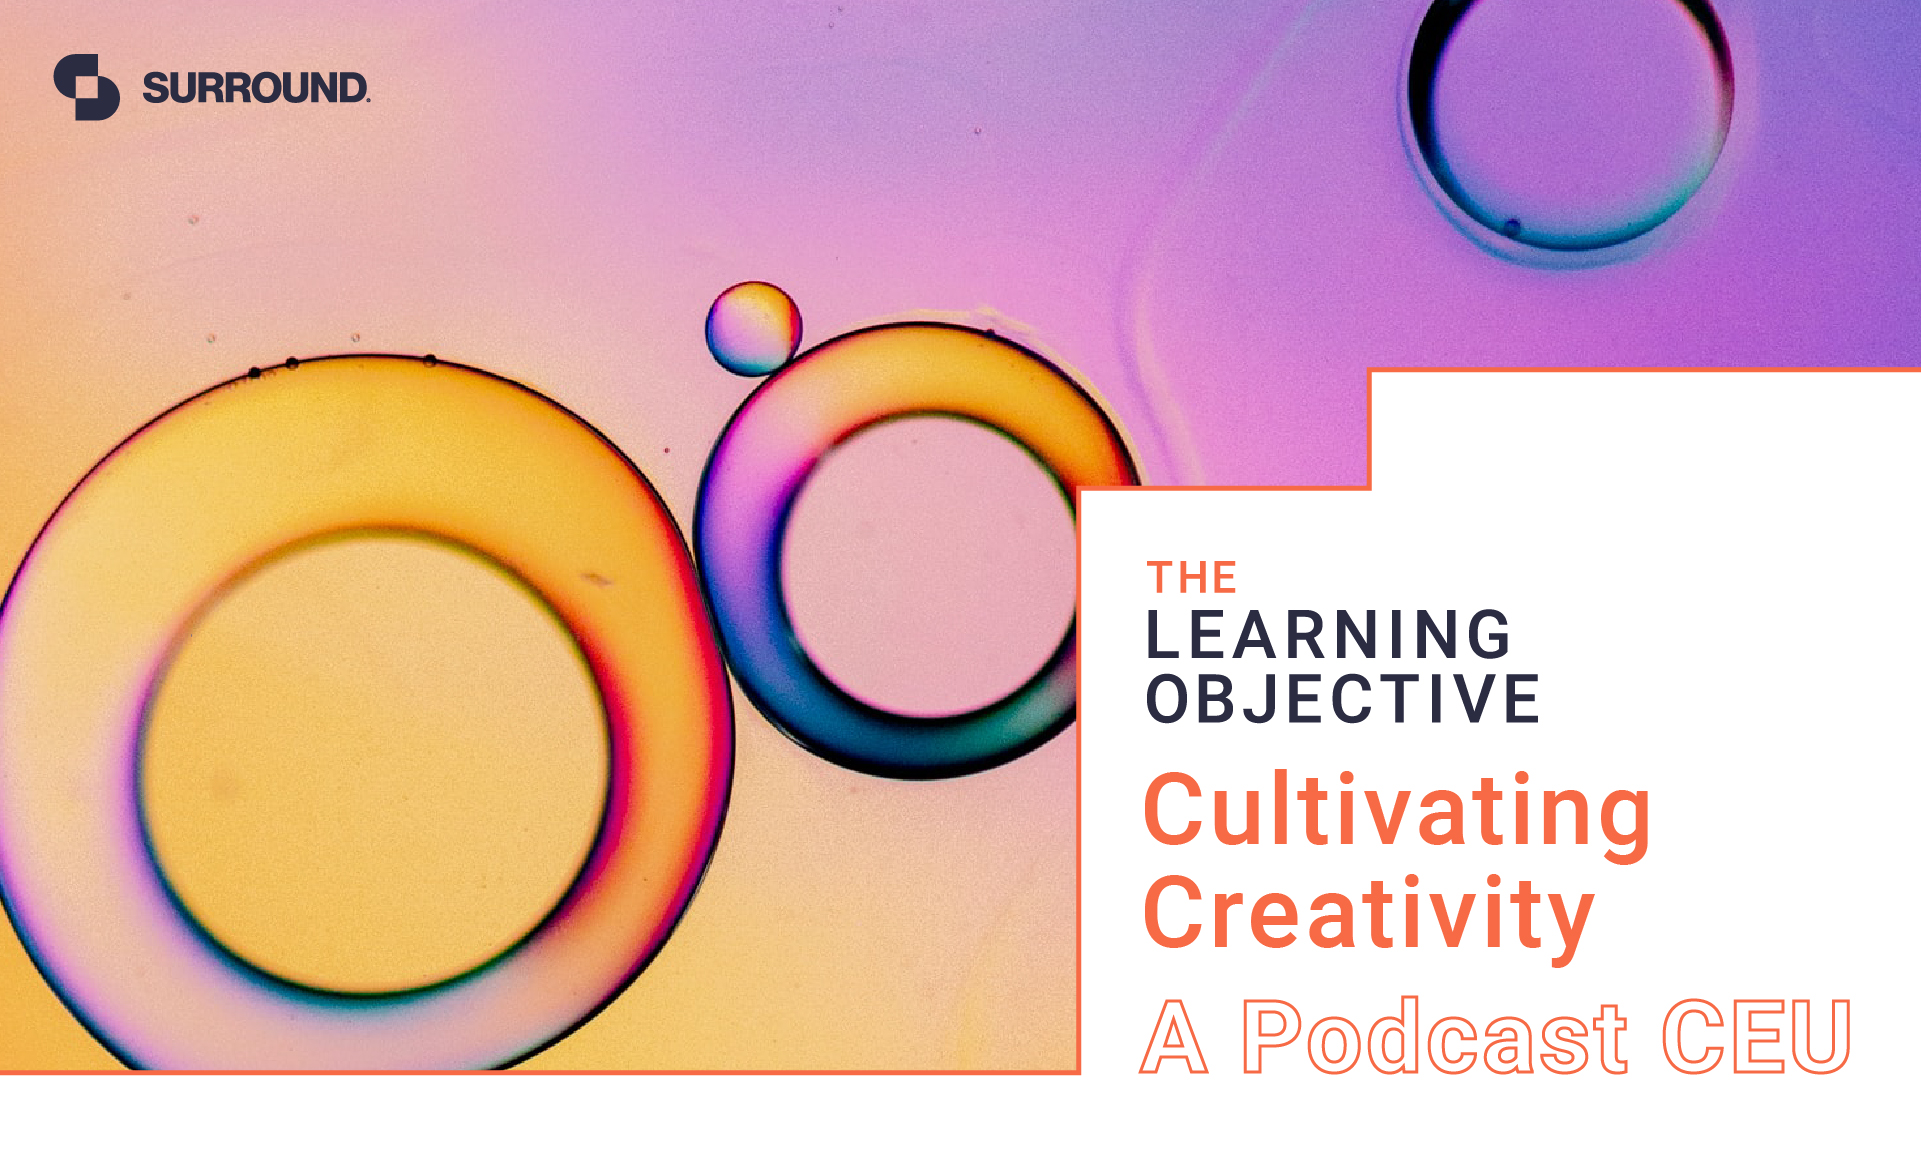 The learning objective CEU Podcast episode from ThinkLab on Cultivating Creativity